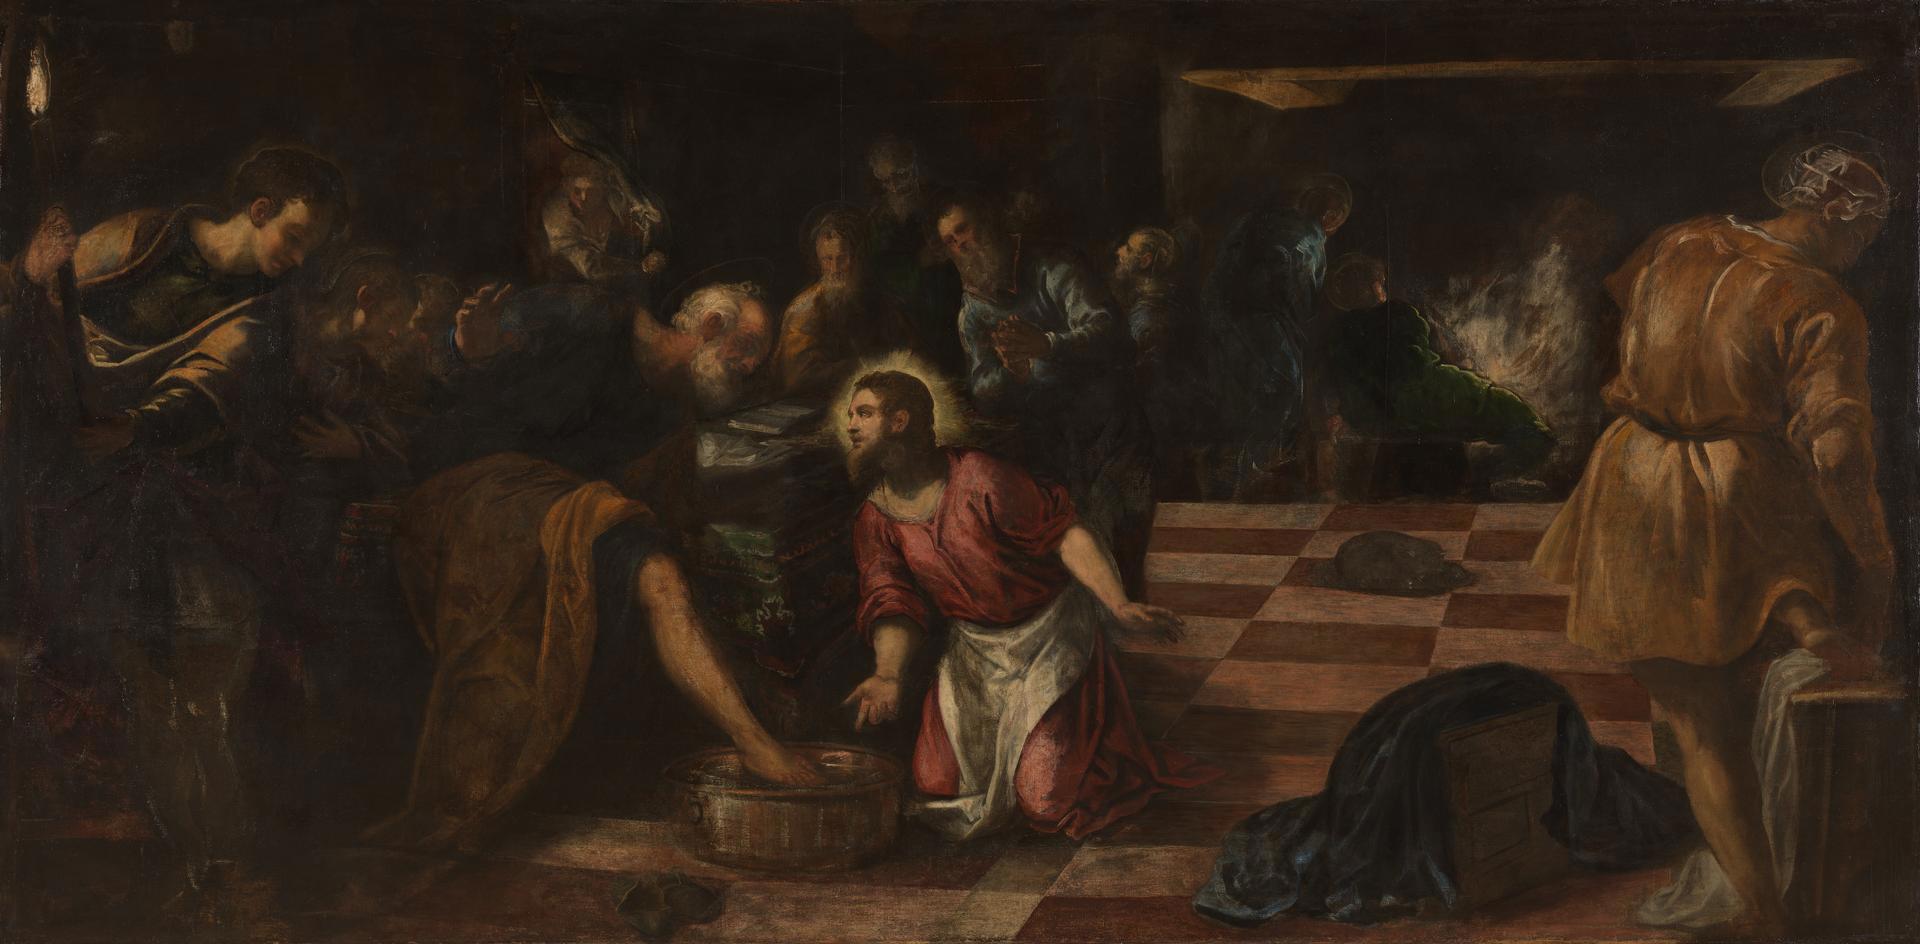 Christ washing the Feet of the Disciples by Jacopo Tintoretto